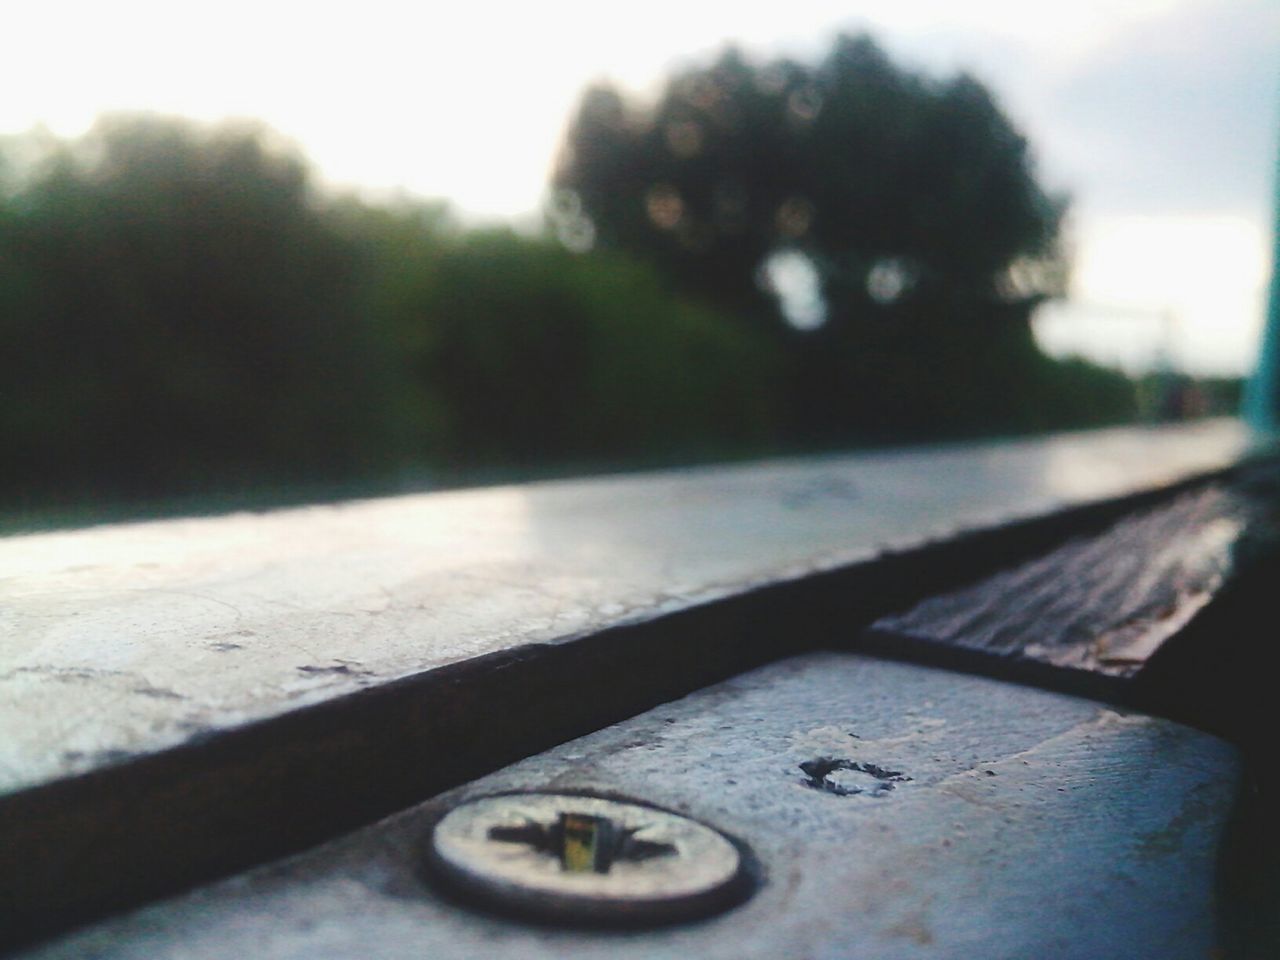 focus on foreground, close-up, selective focus, sunlight, tree, surface level, day, outdoors, metal, no people, nature, railing, sky, road, textured, wood - material, street, shadow, part of, tranquility